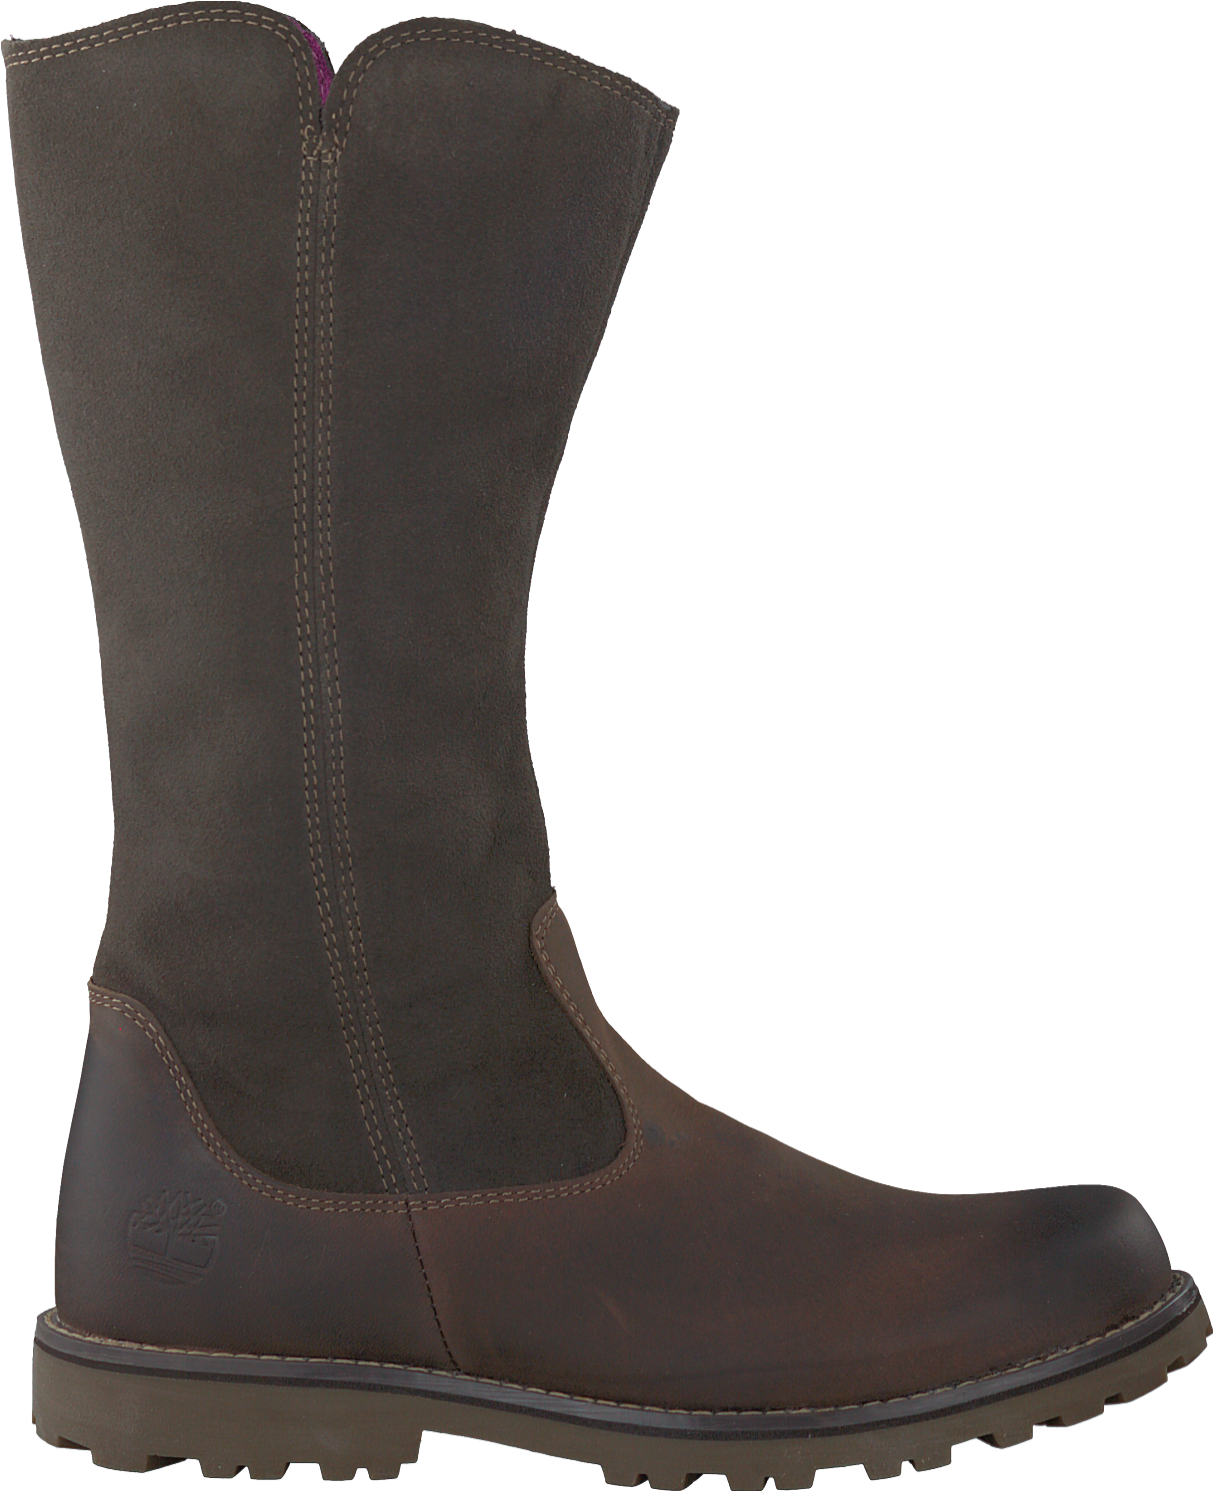 A Brown Boot With A Black Background